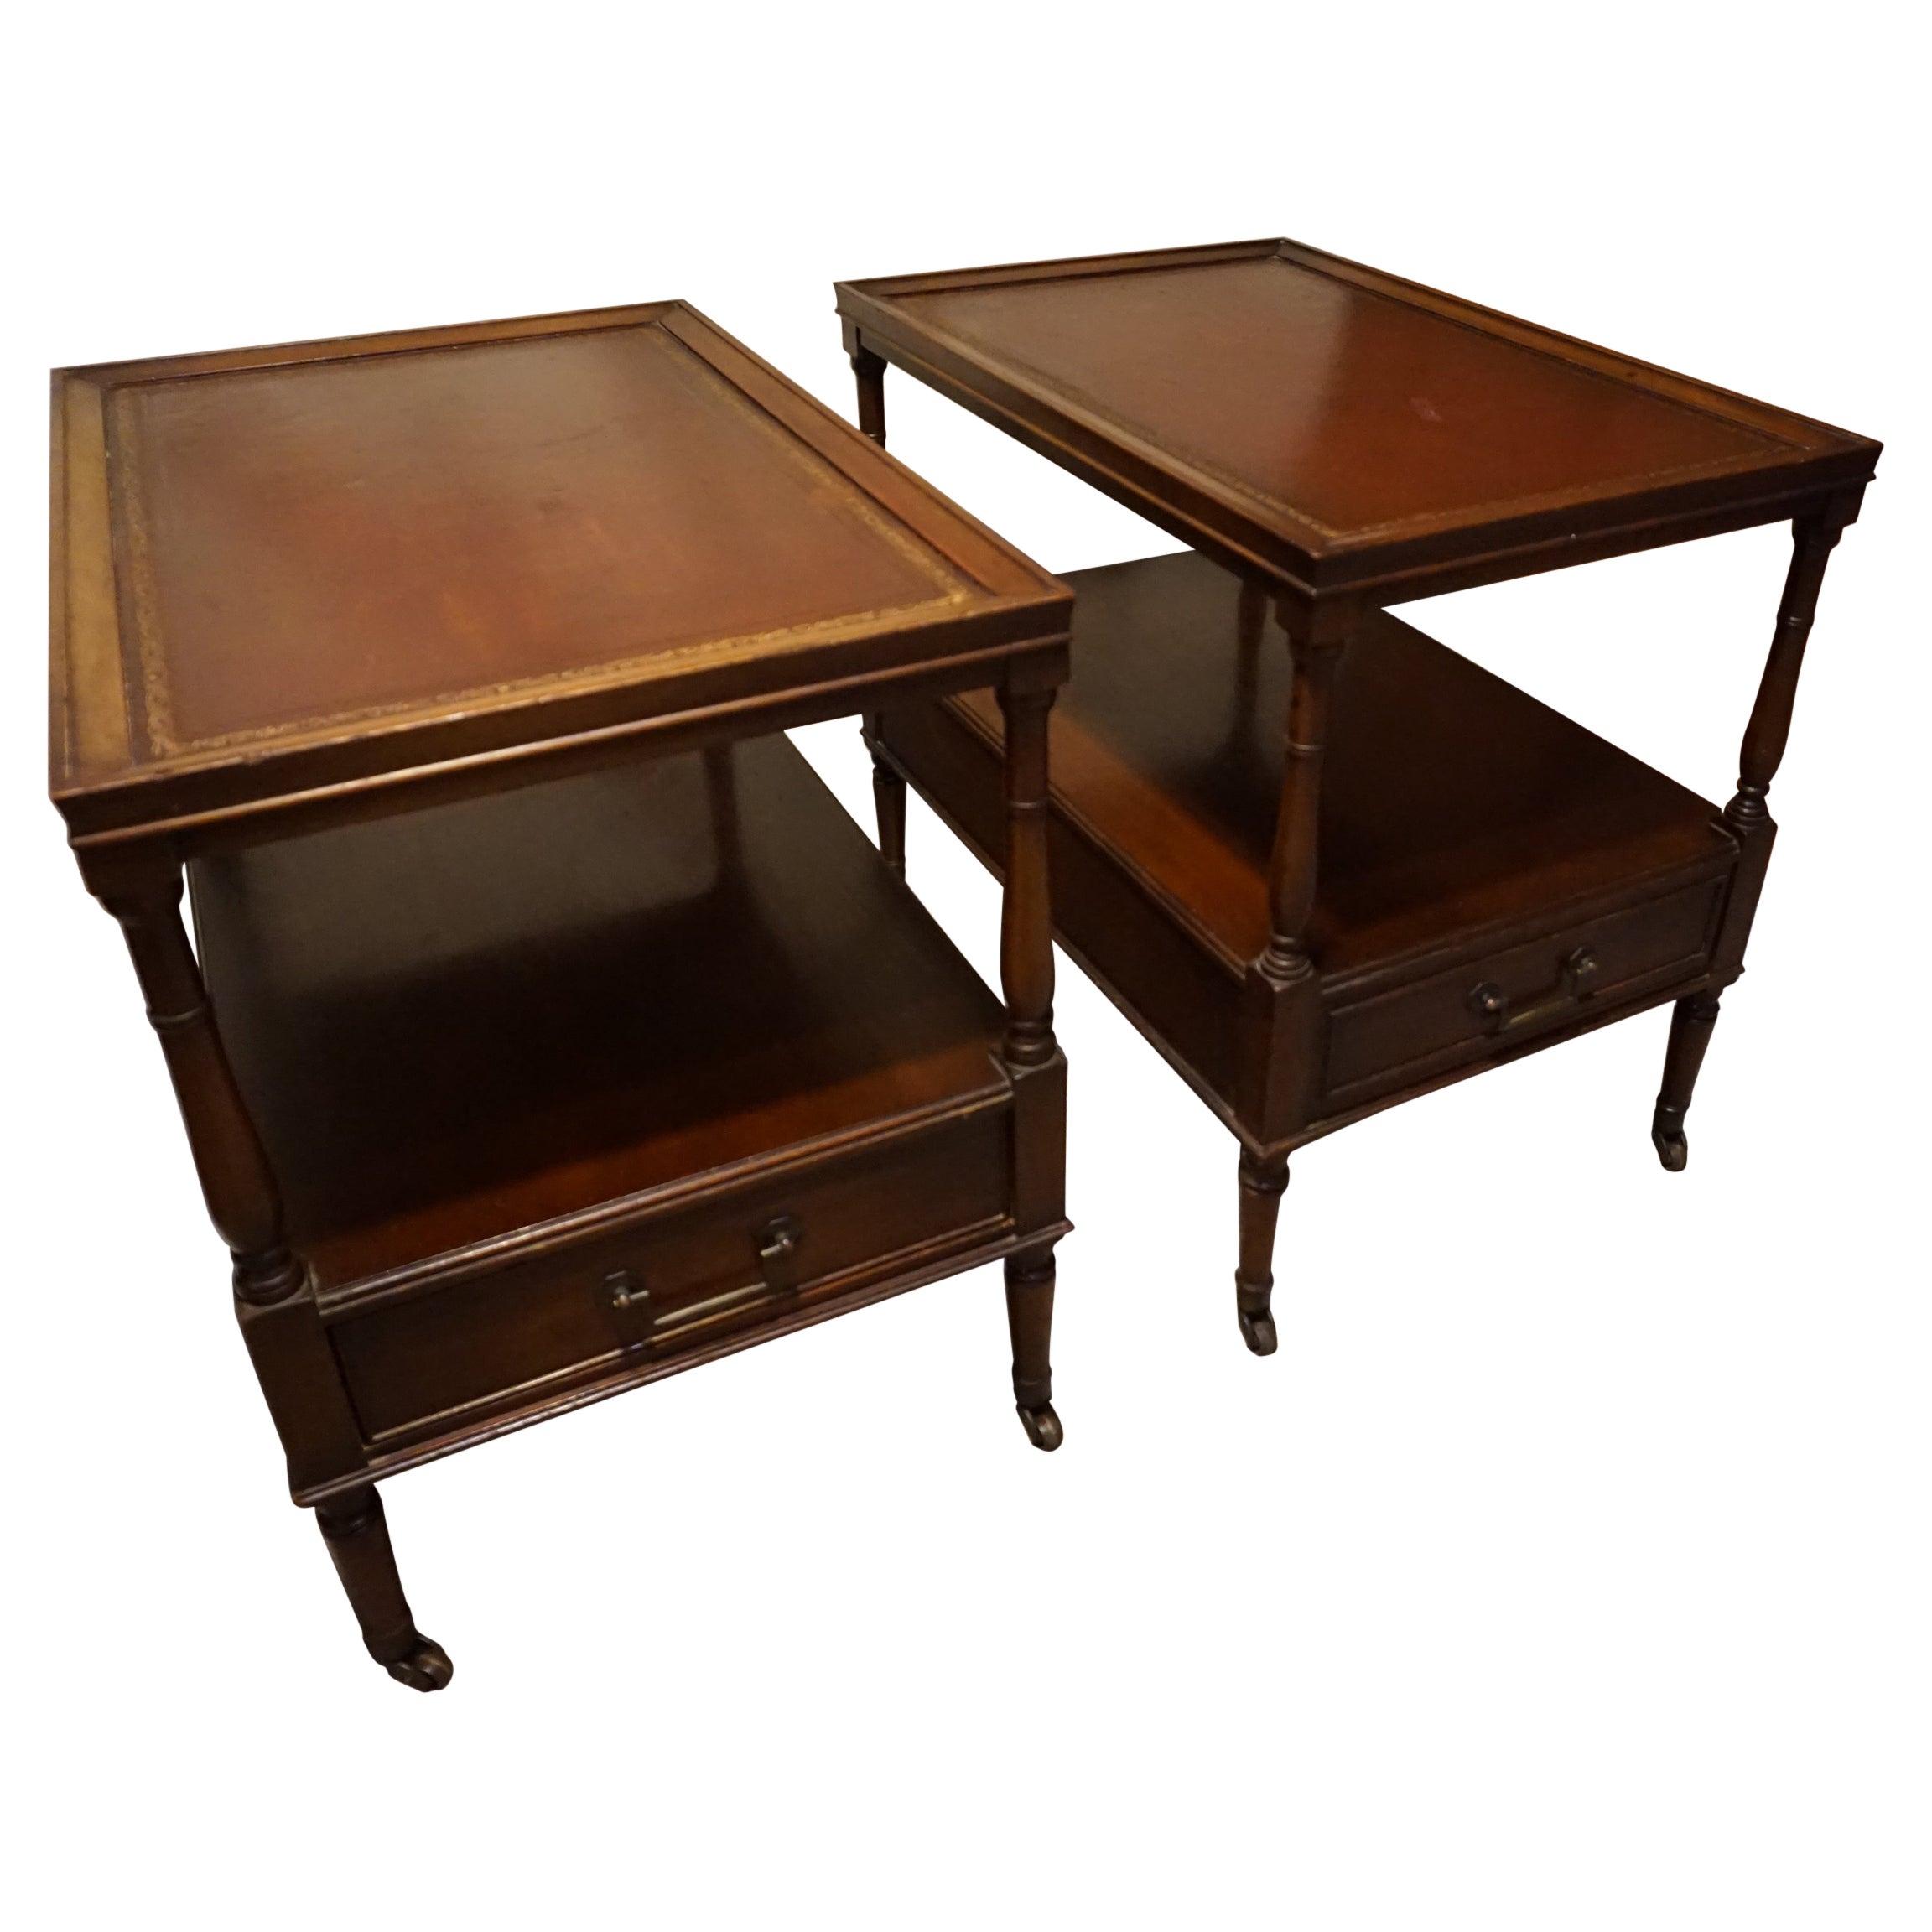 Antique Colonial Style Mahogany Side Tables with Leather Top & Brass Hardware